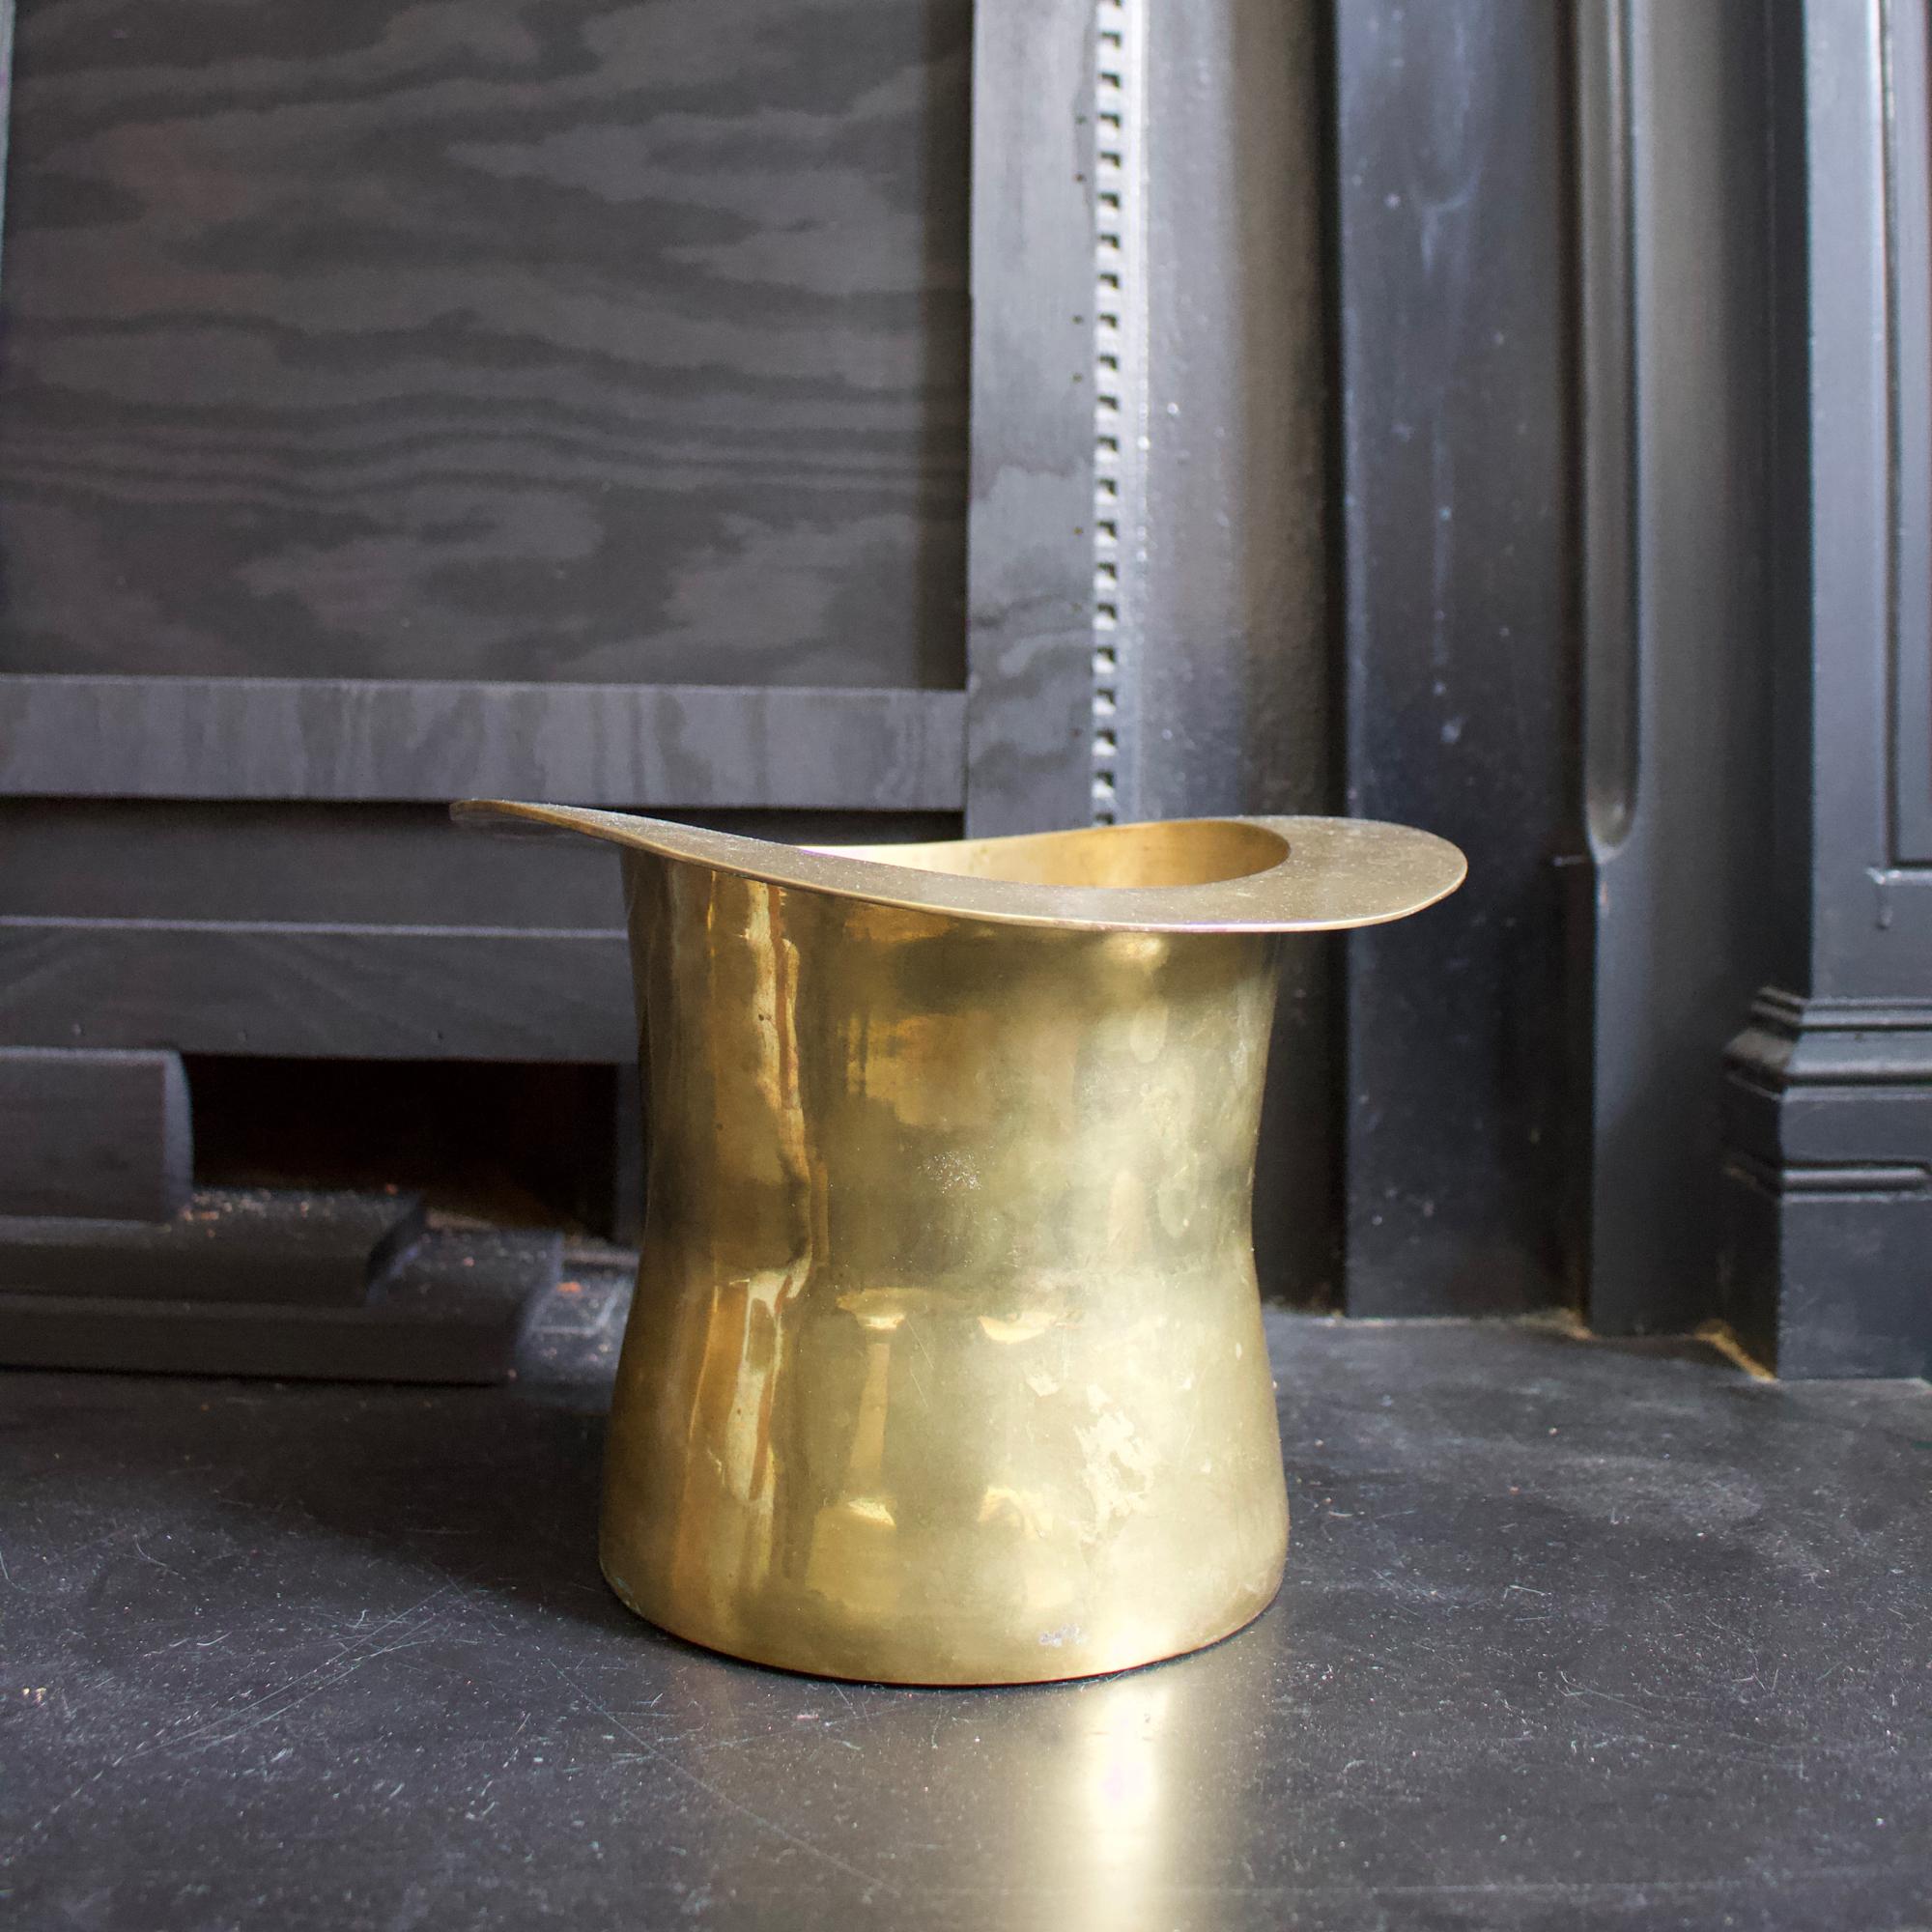 Brass champagne or ice bucket in the shape of a top hat, early to mid-20th century European.

Nice simple design - very much Art Deco style - with a handcrafted appearance. Good vintage condition with age appropriate signs of wear; some surface